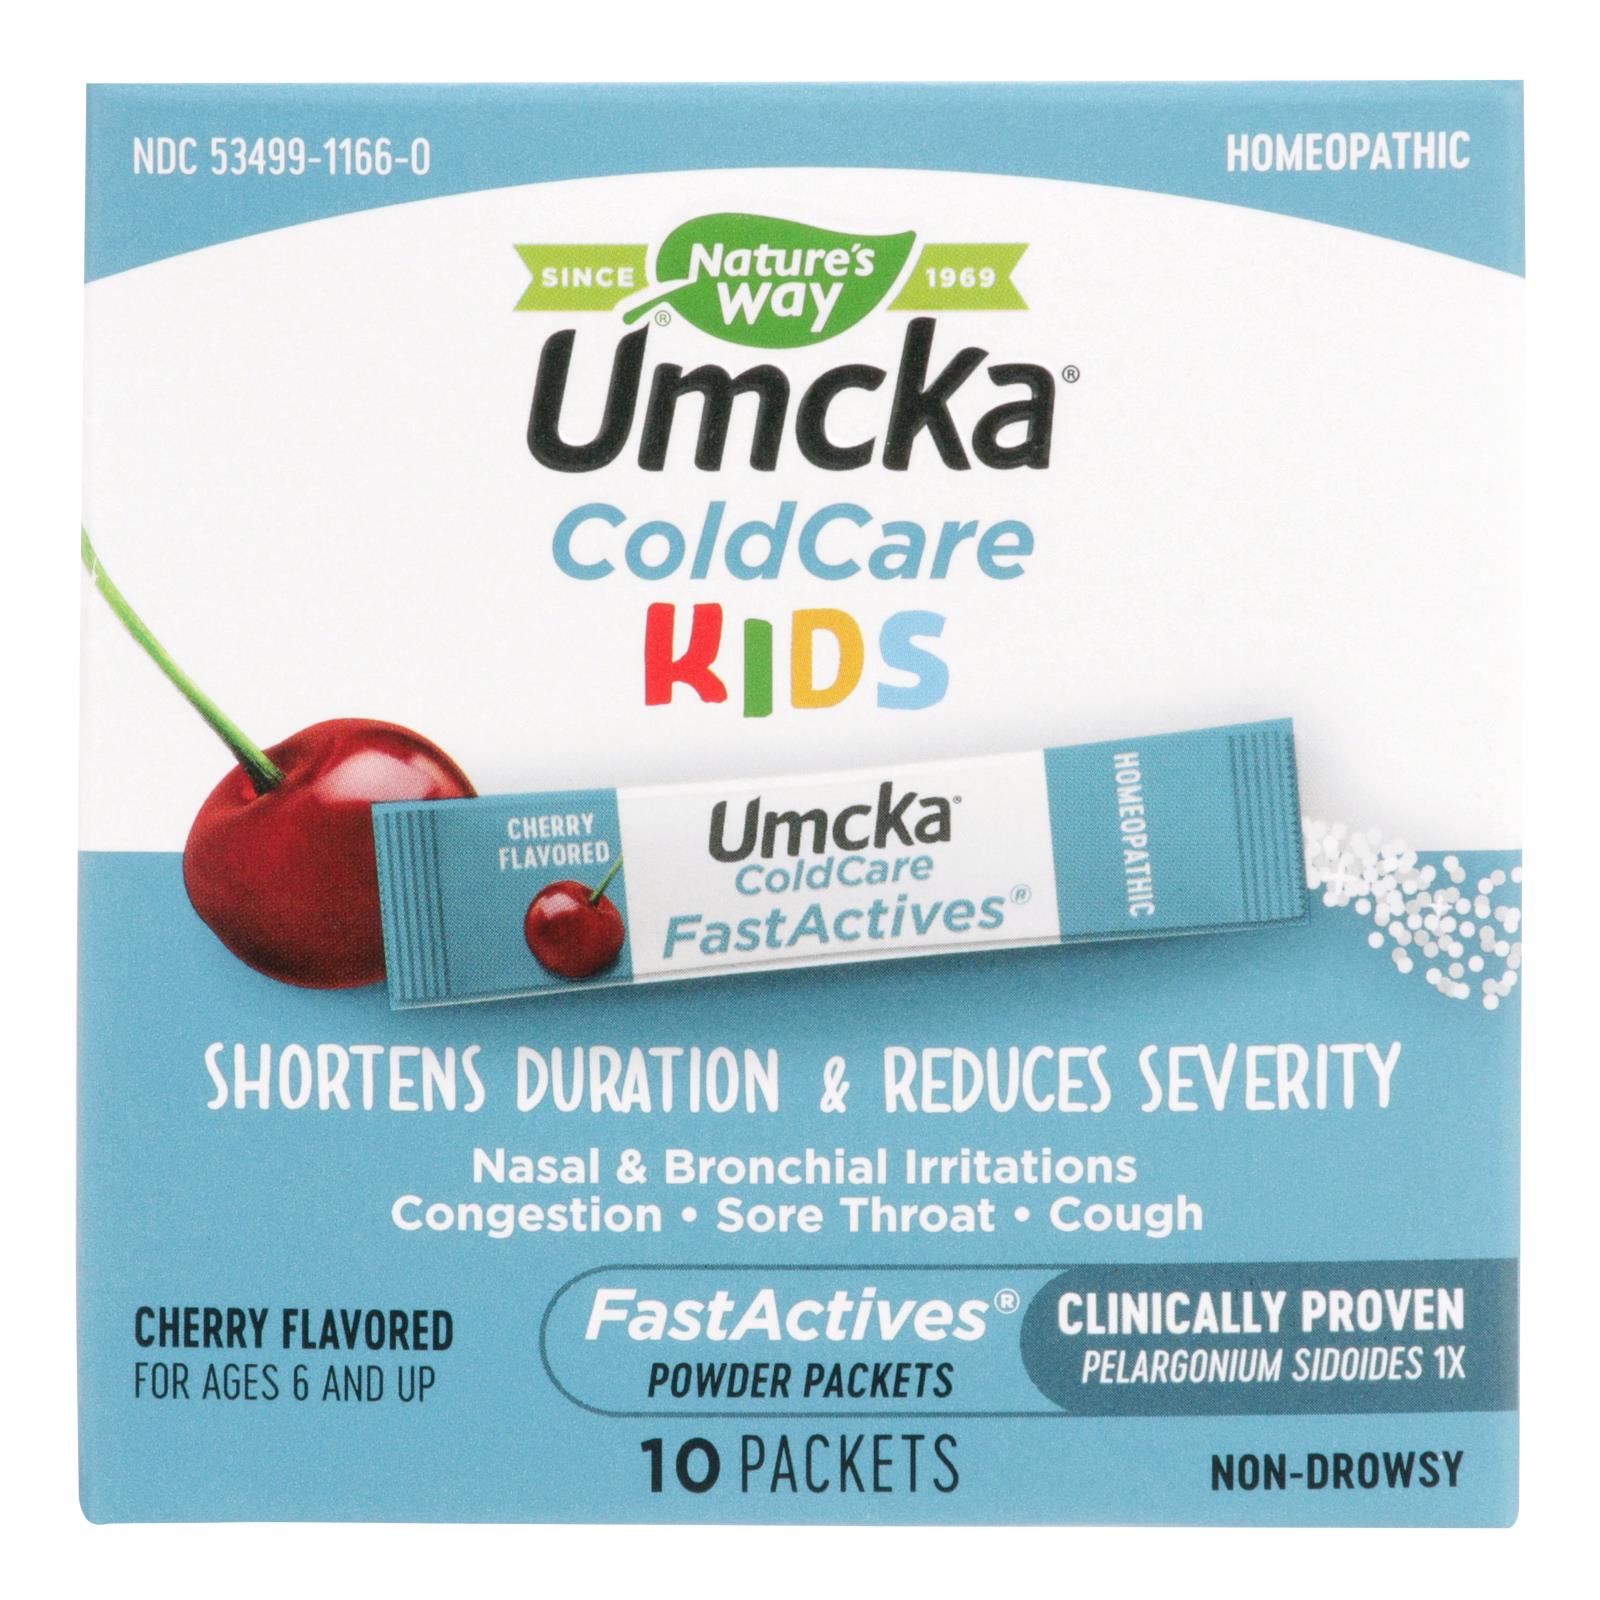 Nature's Way - Umcka FastActives Children's Cherry ColdCare - 1 Each - 10 PK